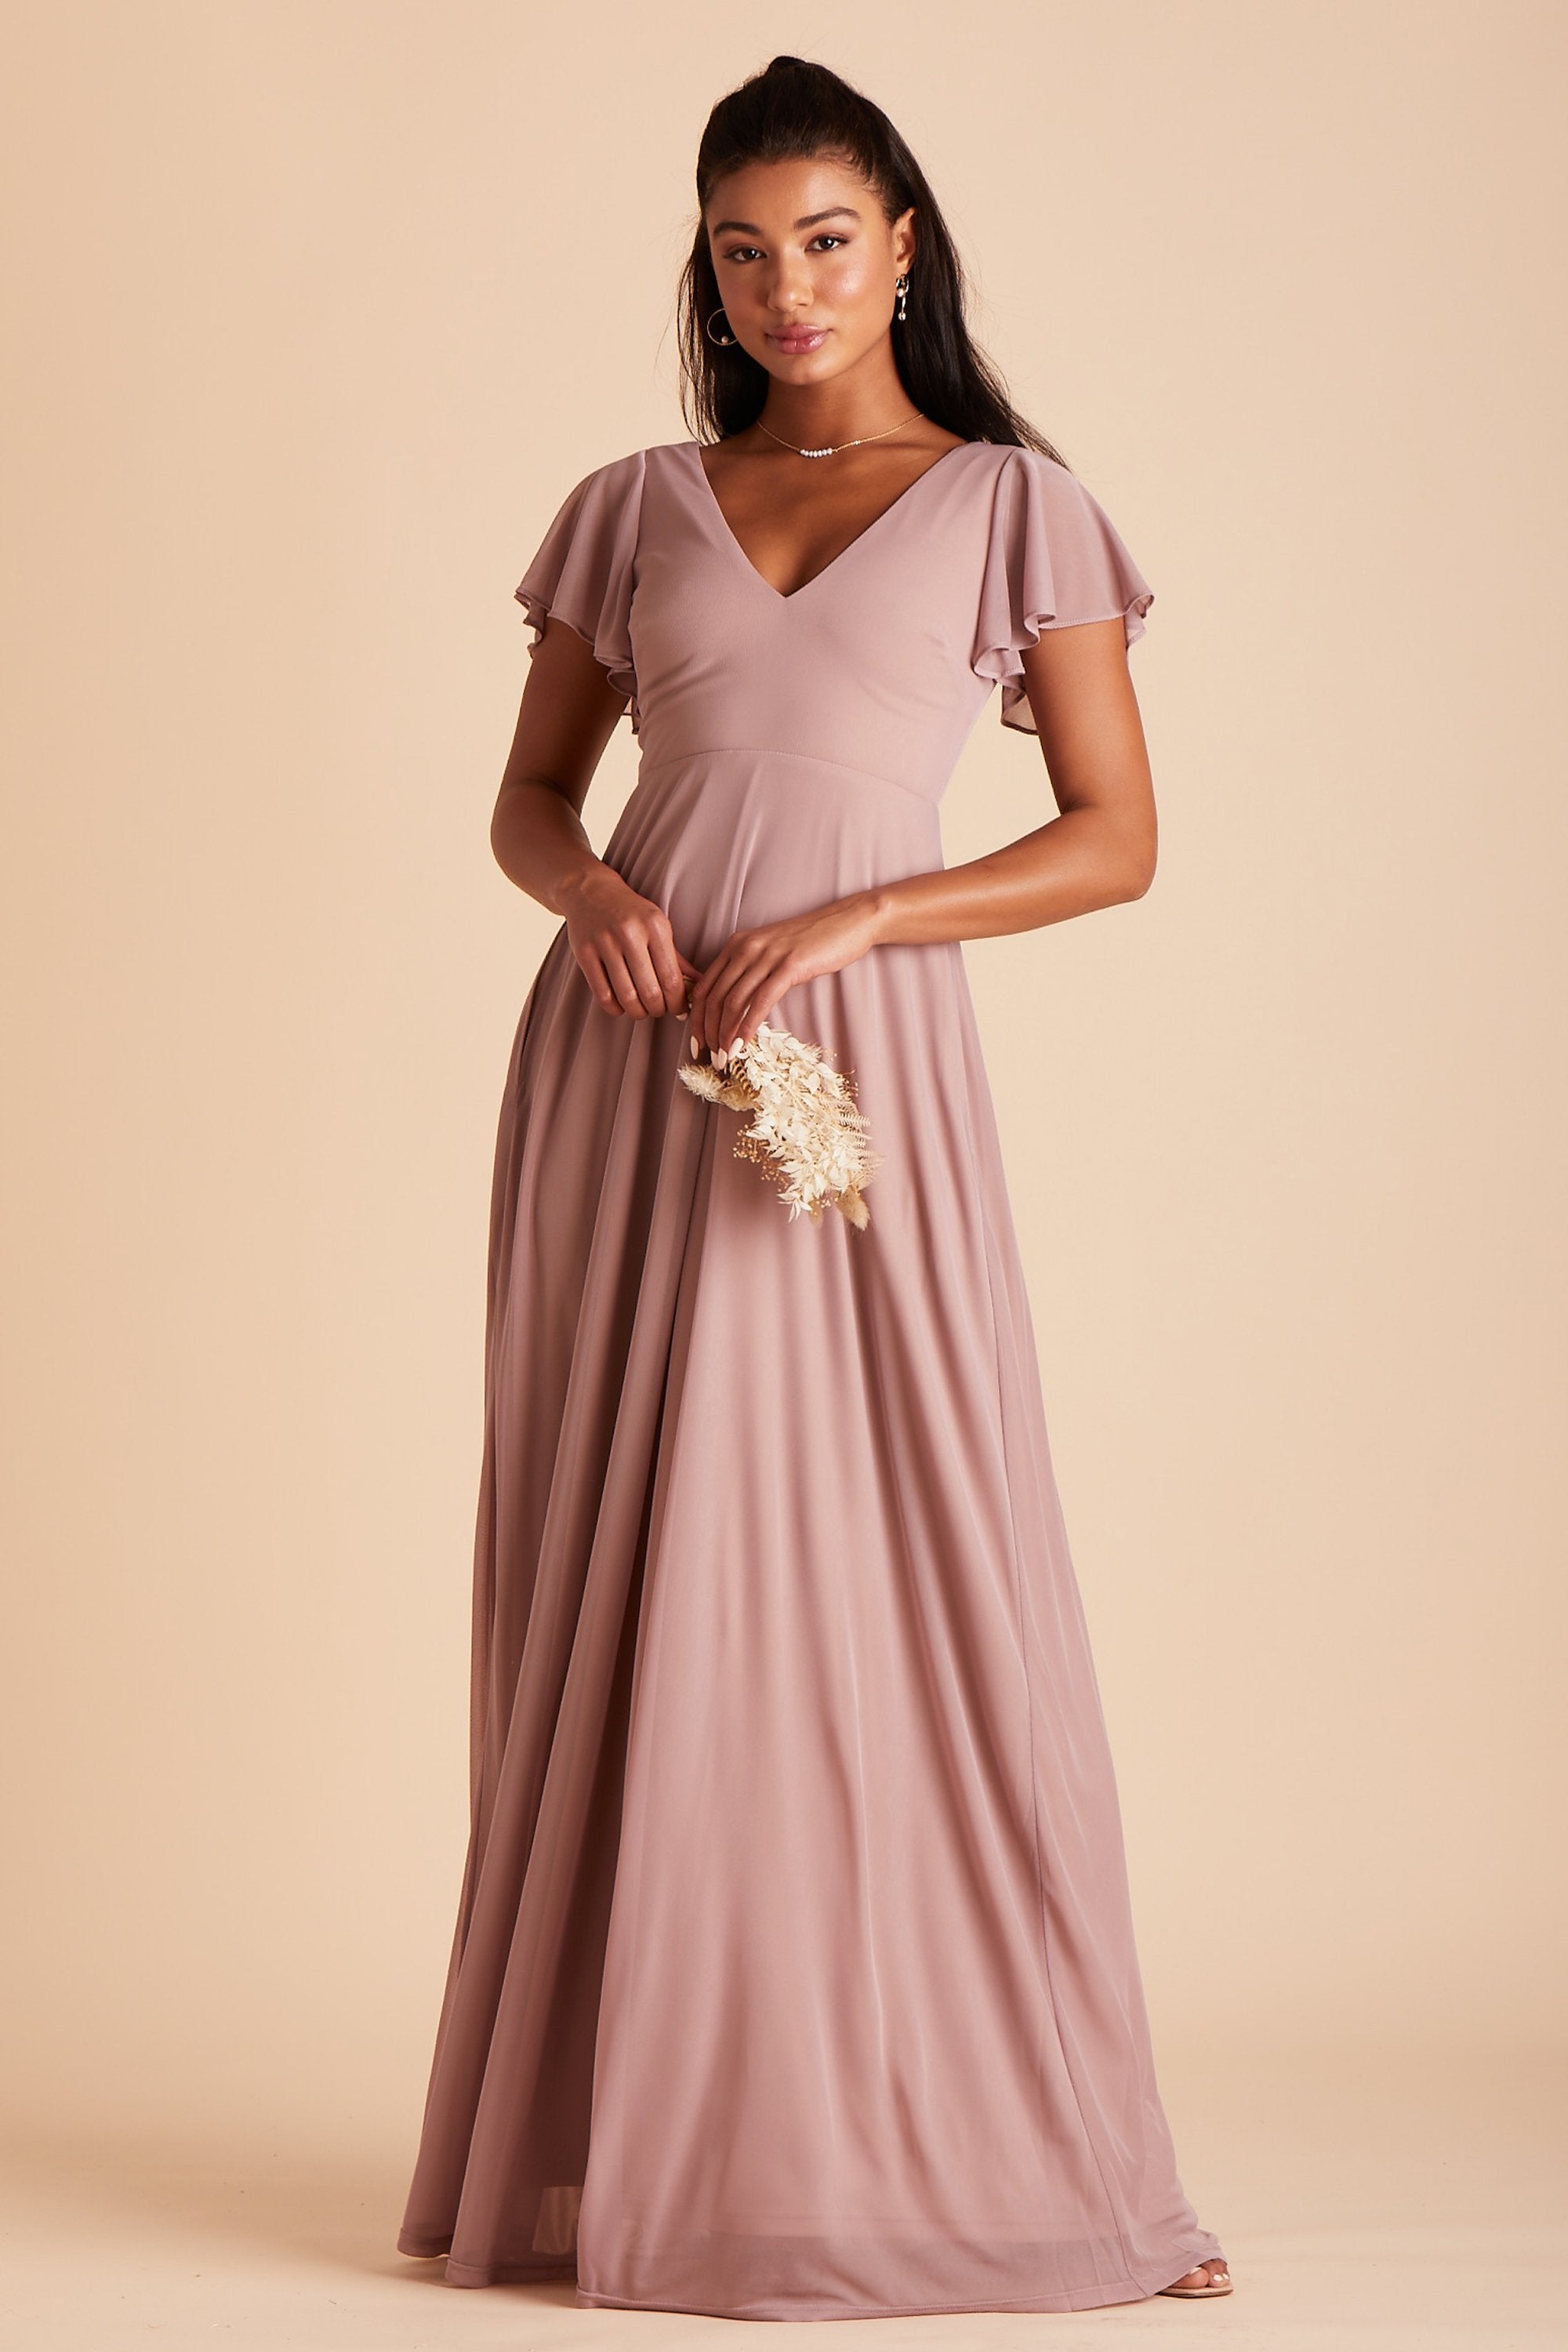 Hannah bridesmaids dress in mauve chiffon by Birdy Grey, front view